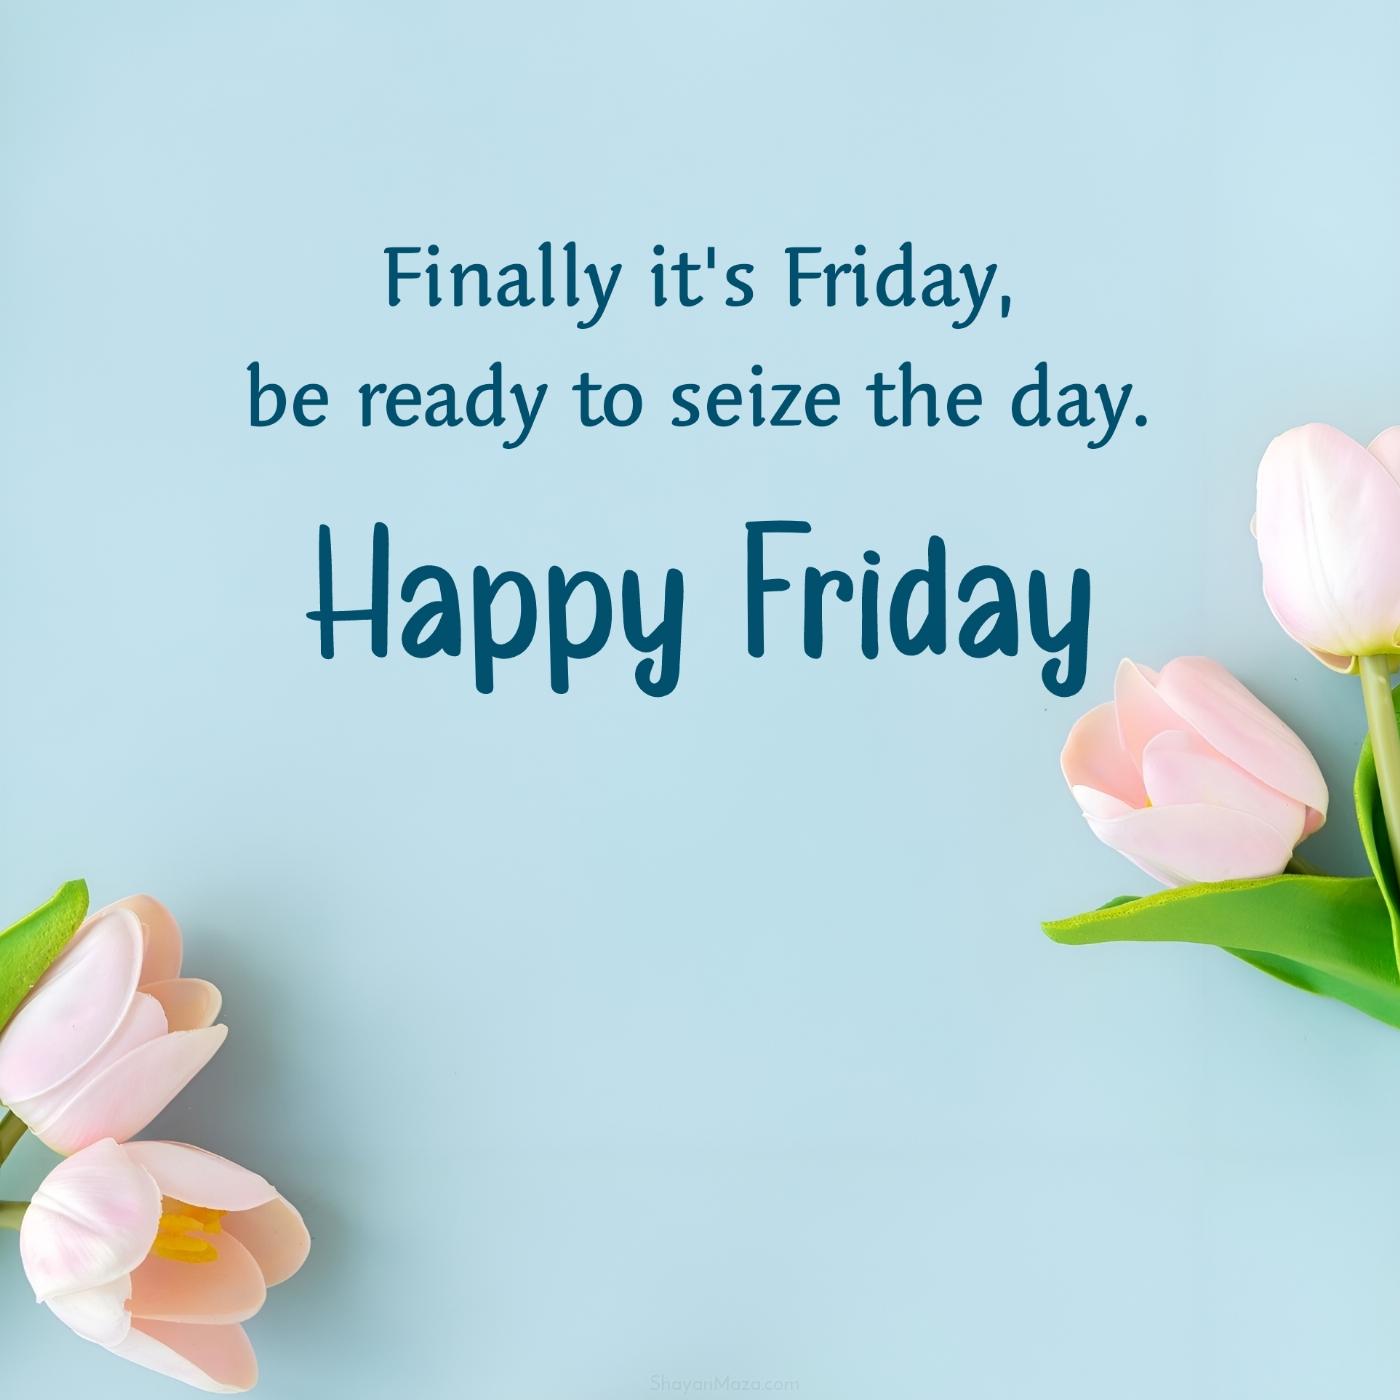 Finally it's Friday be ready to seize the day